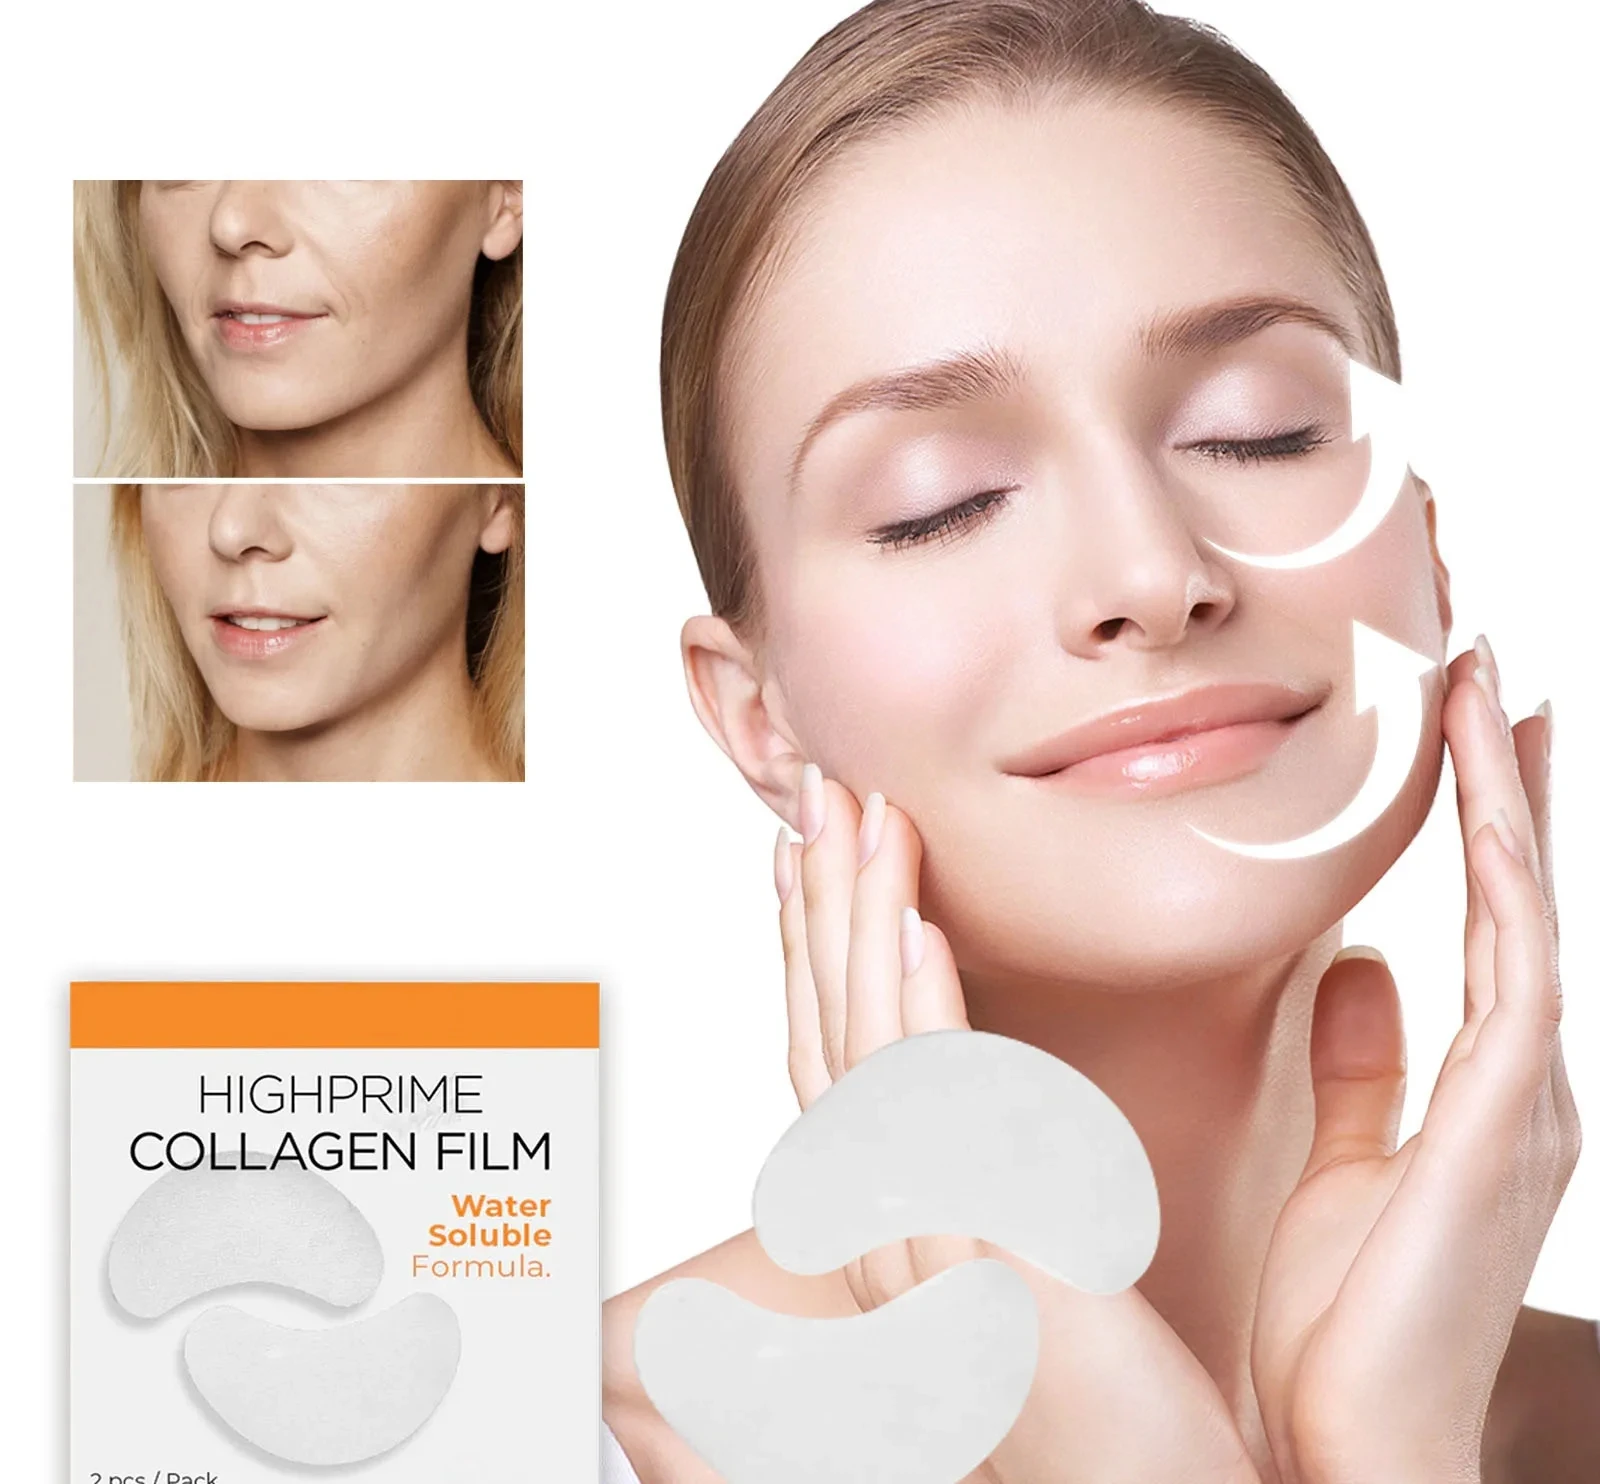 

2Pcs Collagen Soluble Film Eye Zone Mask Vitamin Patches Hyaluronic Acid Moisturizing Firming Face Dark Circles Korean Cosmetic